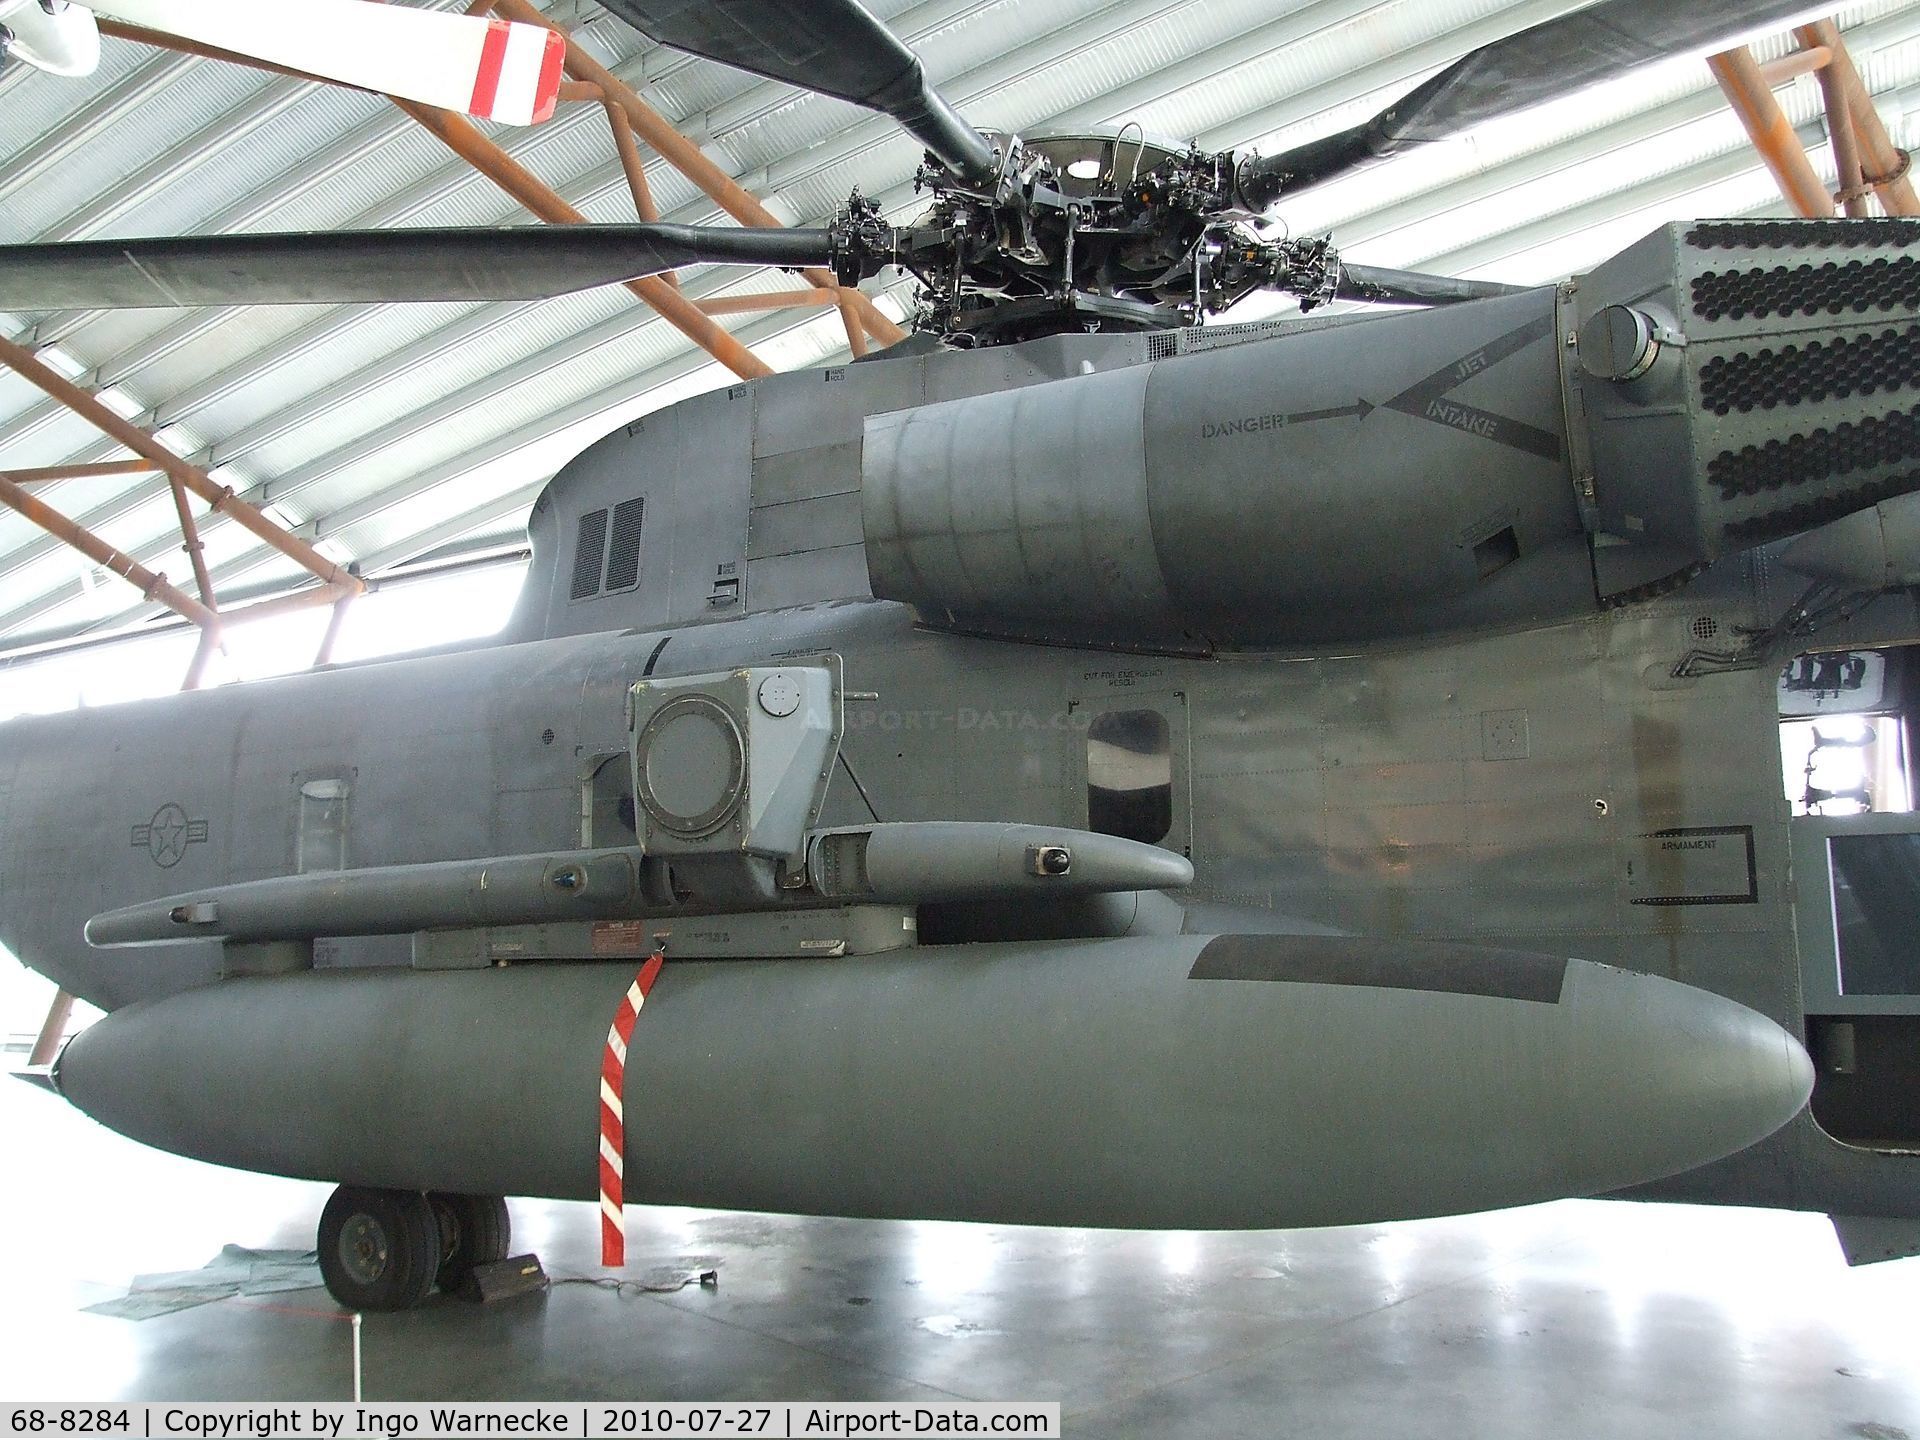 68-8284, 1968 Sikorsky MH-53M Pave Low IV C/N 65-131, Sikorsky MH-53M at the RAF Museum, Cosford